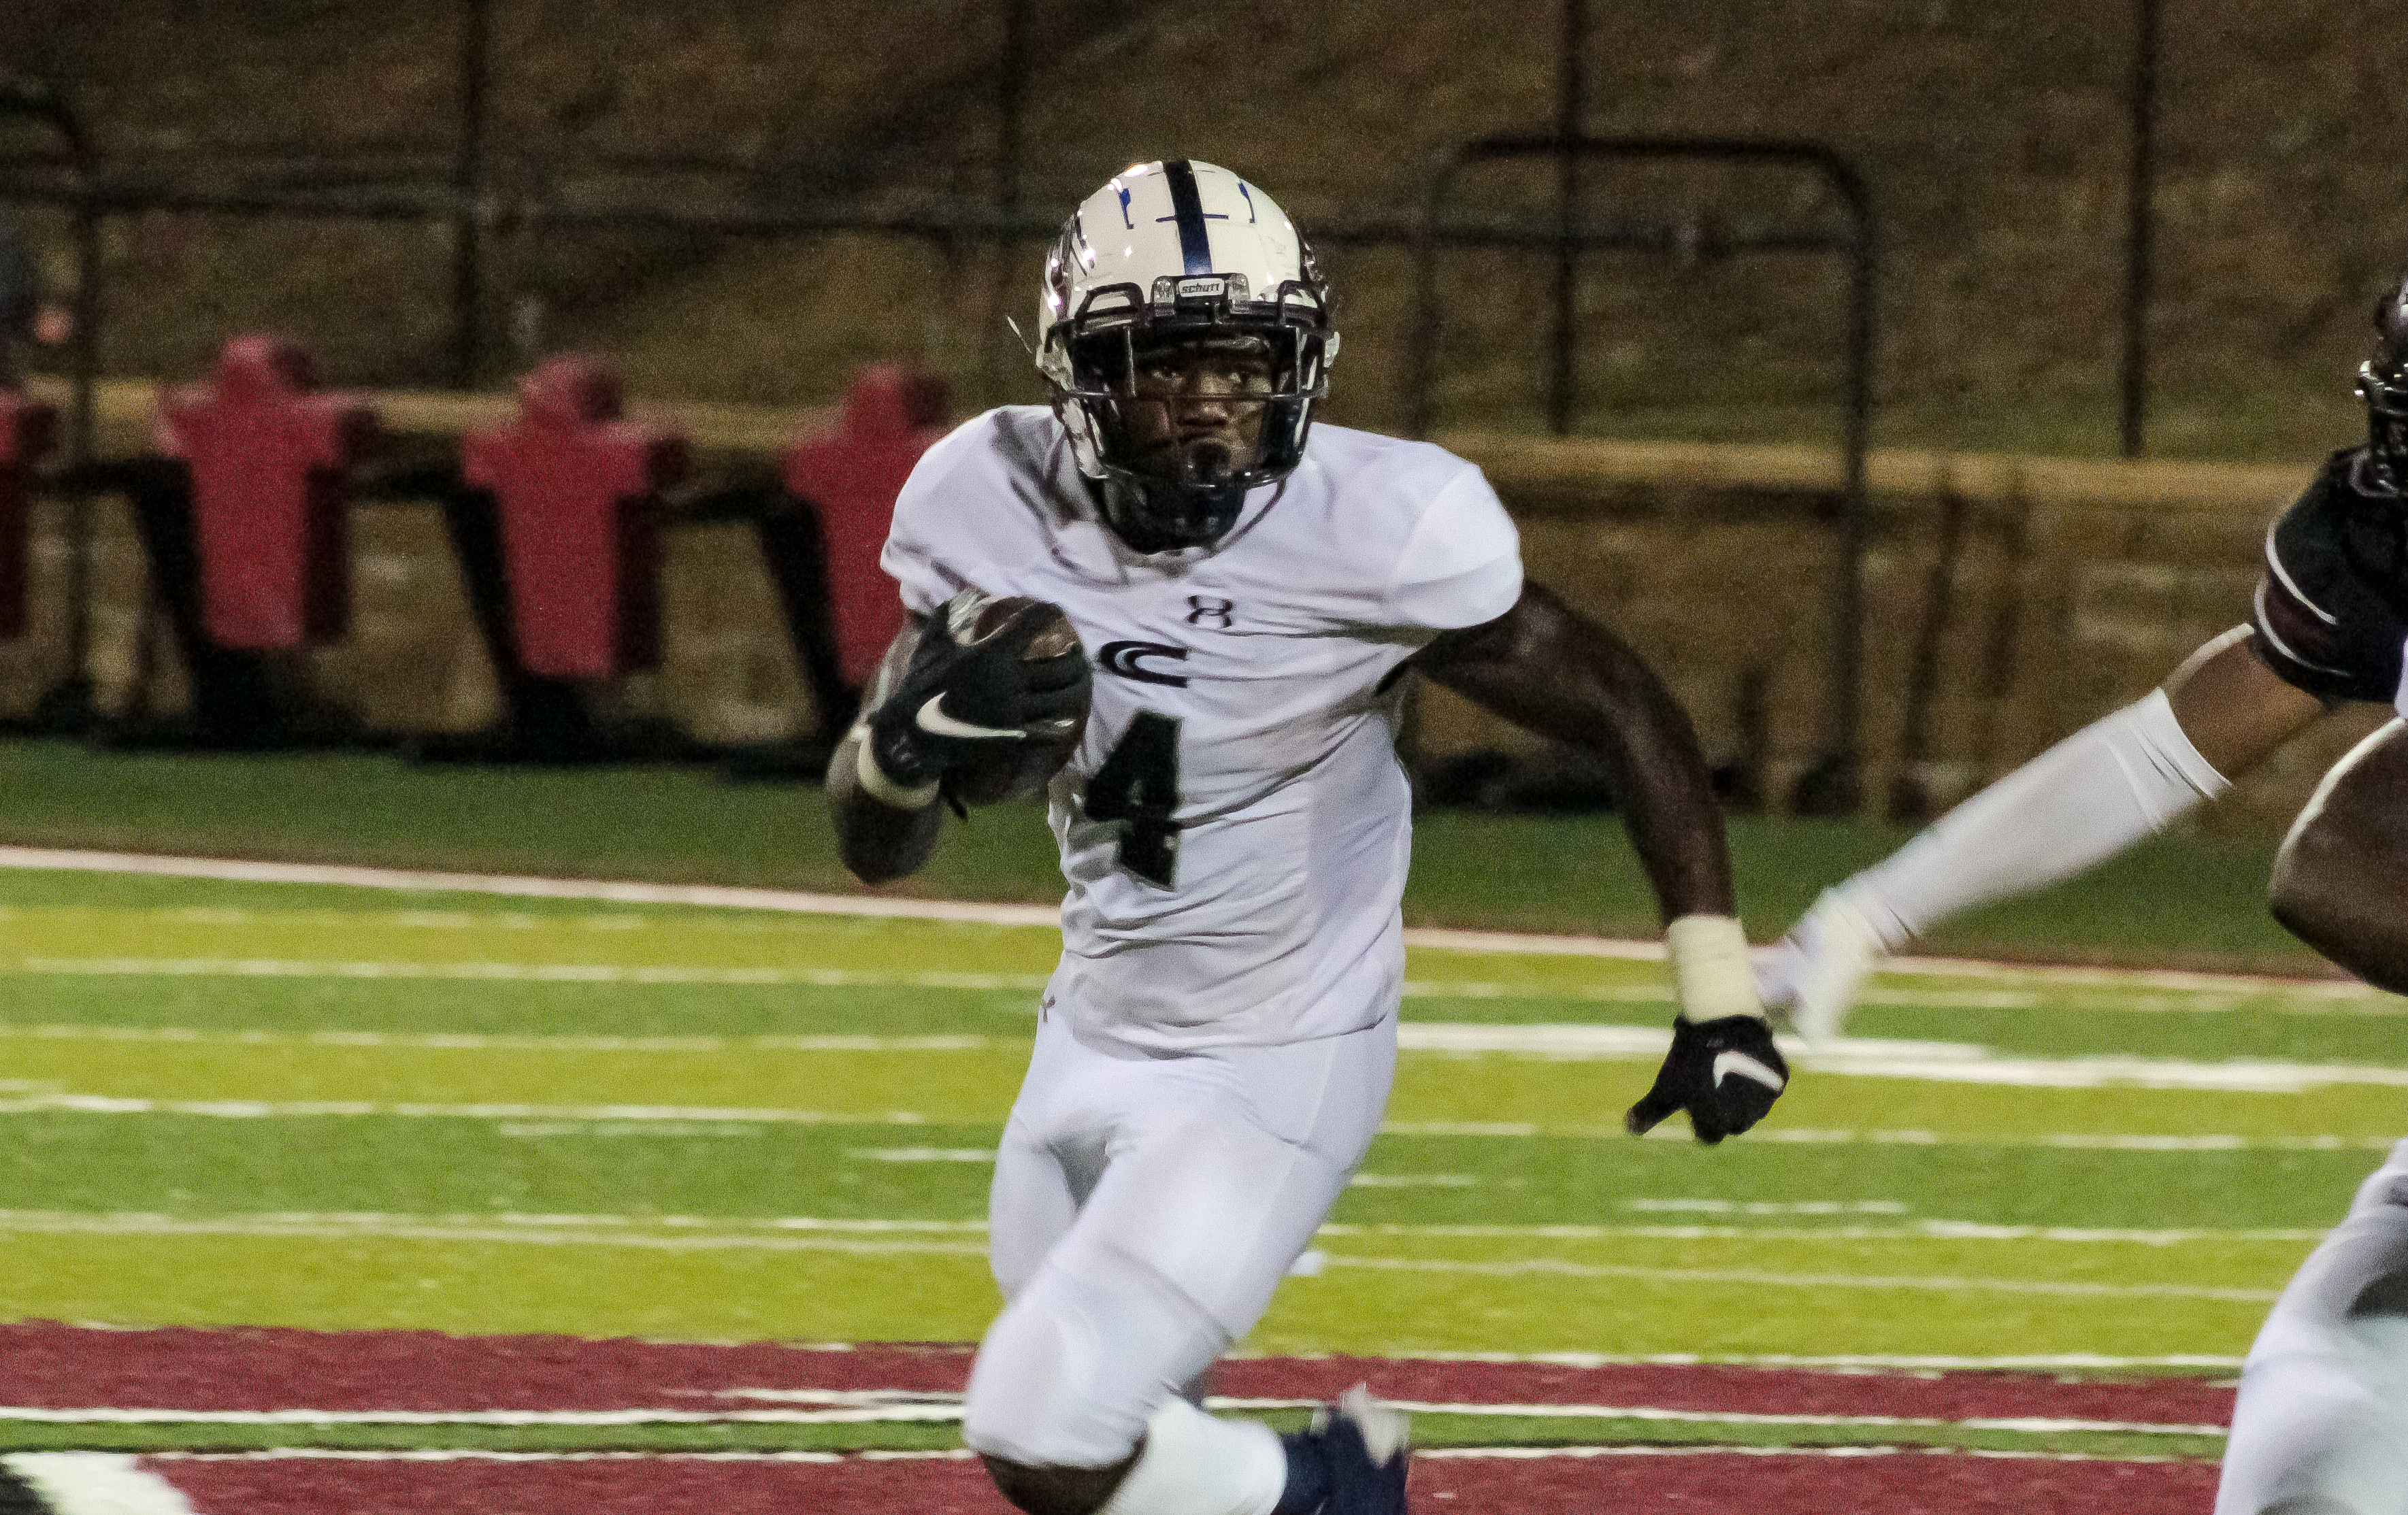 Clay-Chalkville claws past Shades Valley